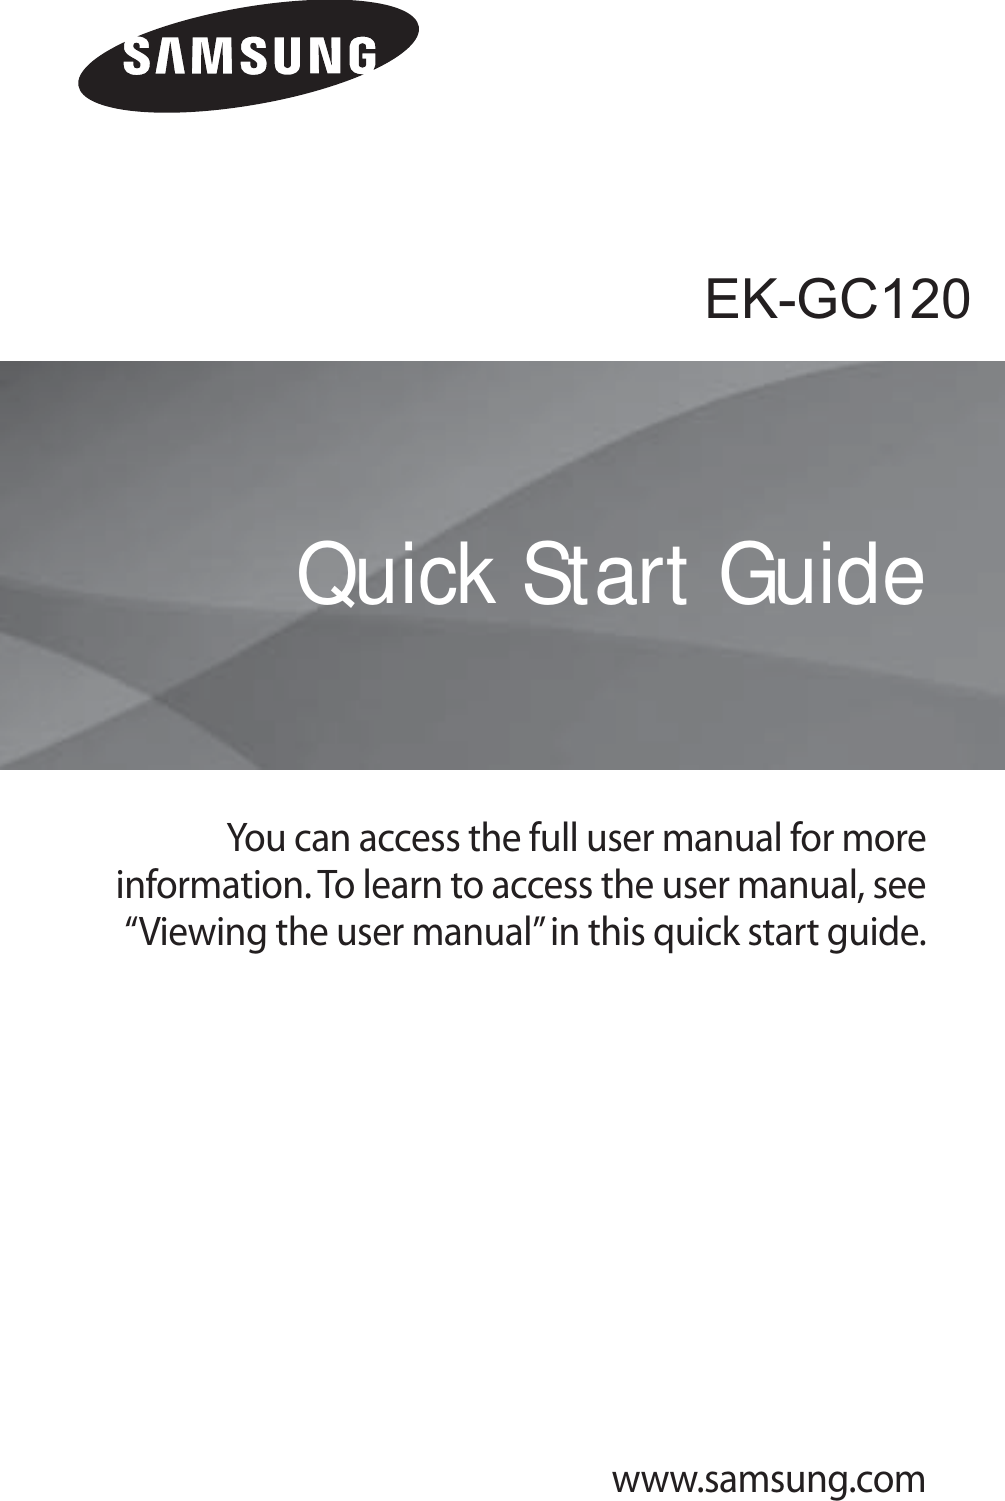 www.samsung.comEK-GC100You can access the full user manual for more information. To learn to access the user manual, see “Viewing the user manual” in this quick start guide.Quick Start GuideEK-GC120